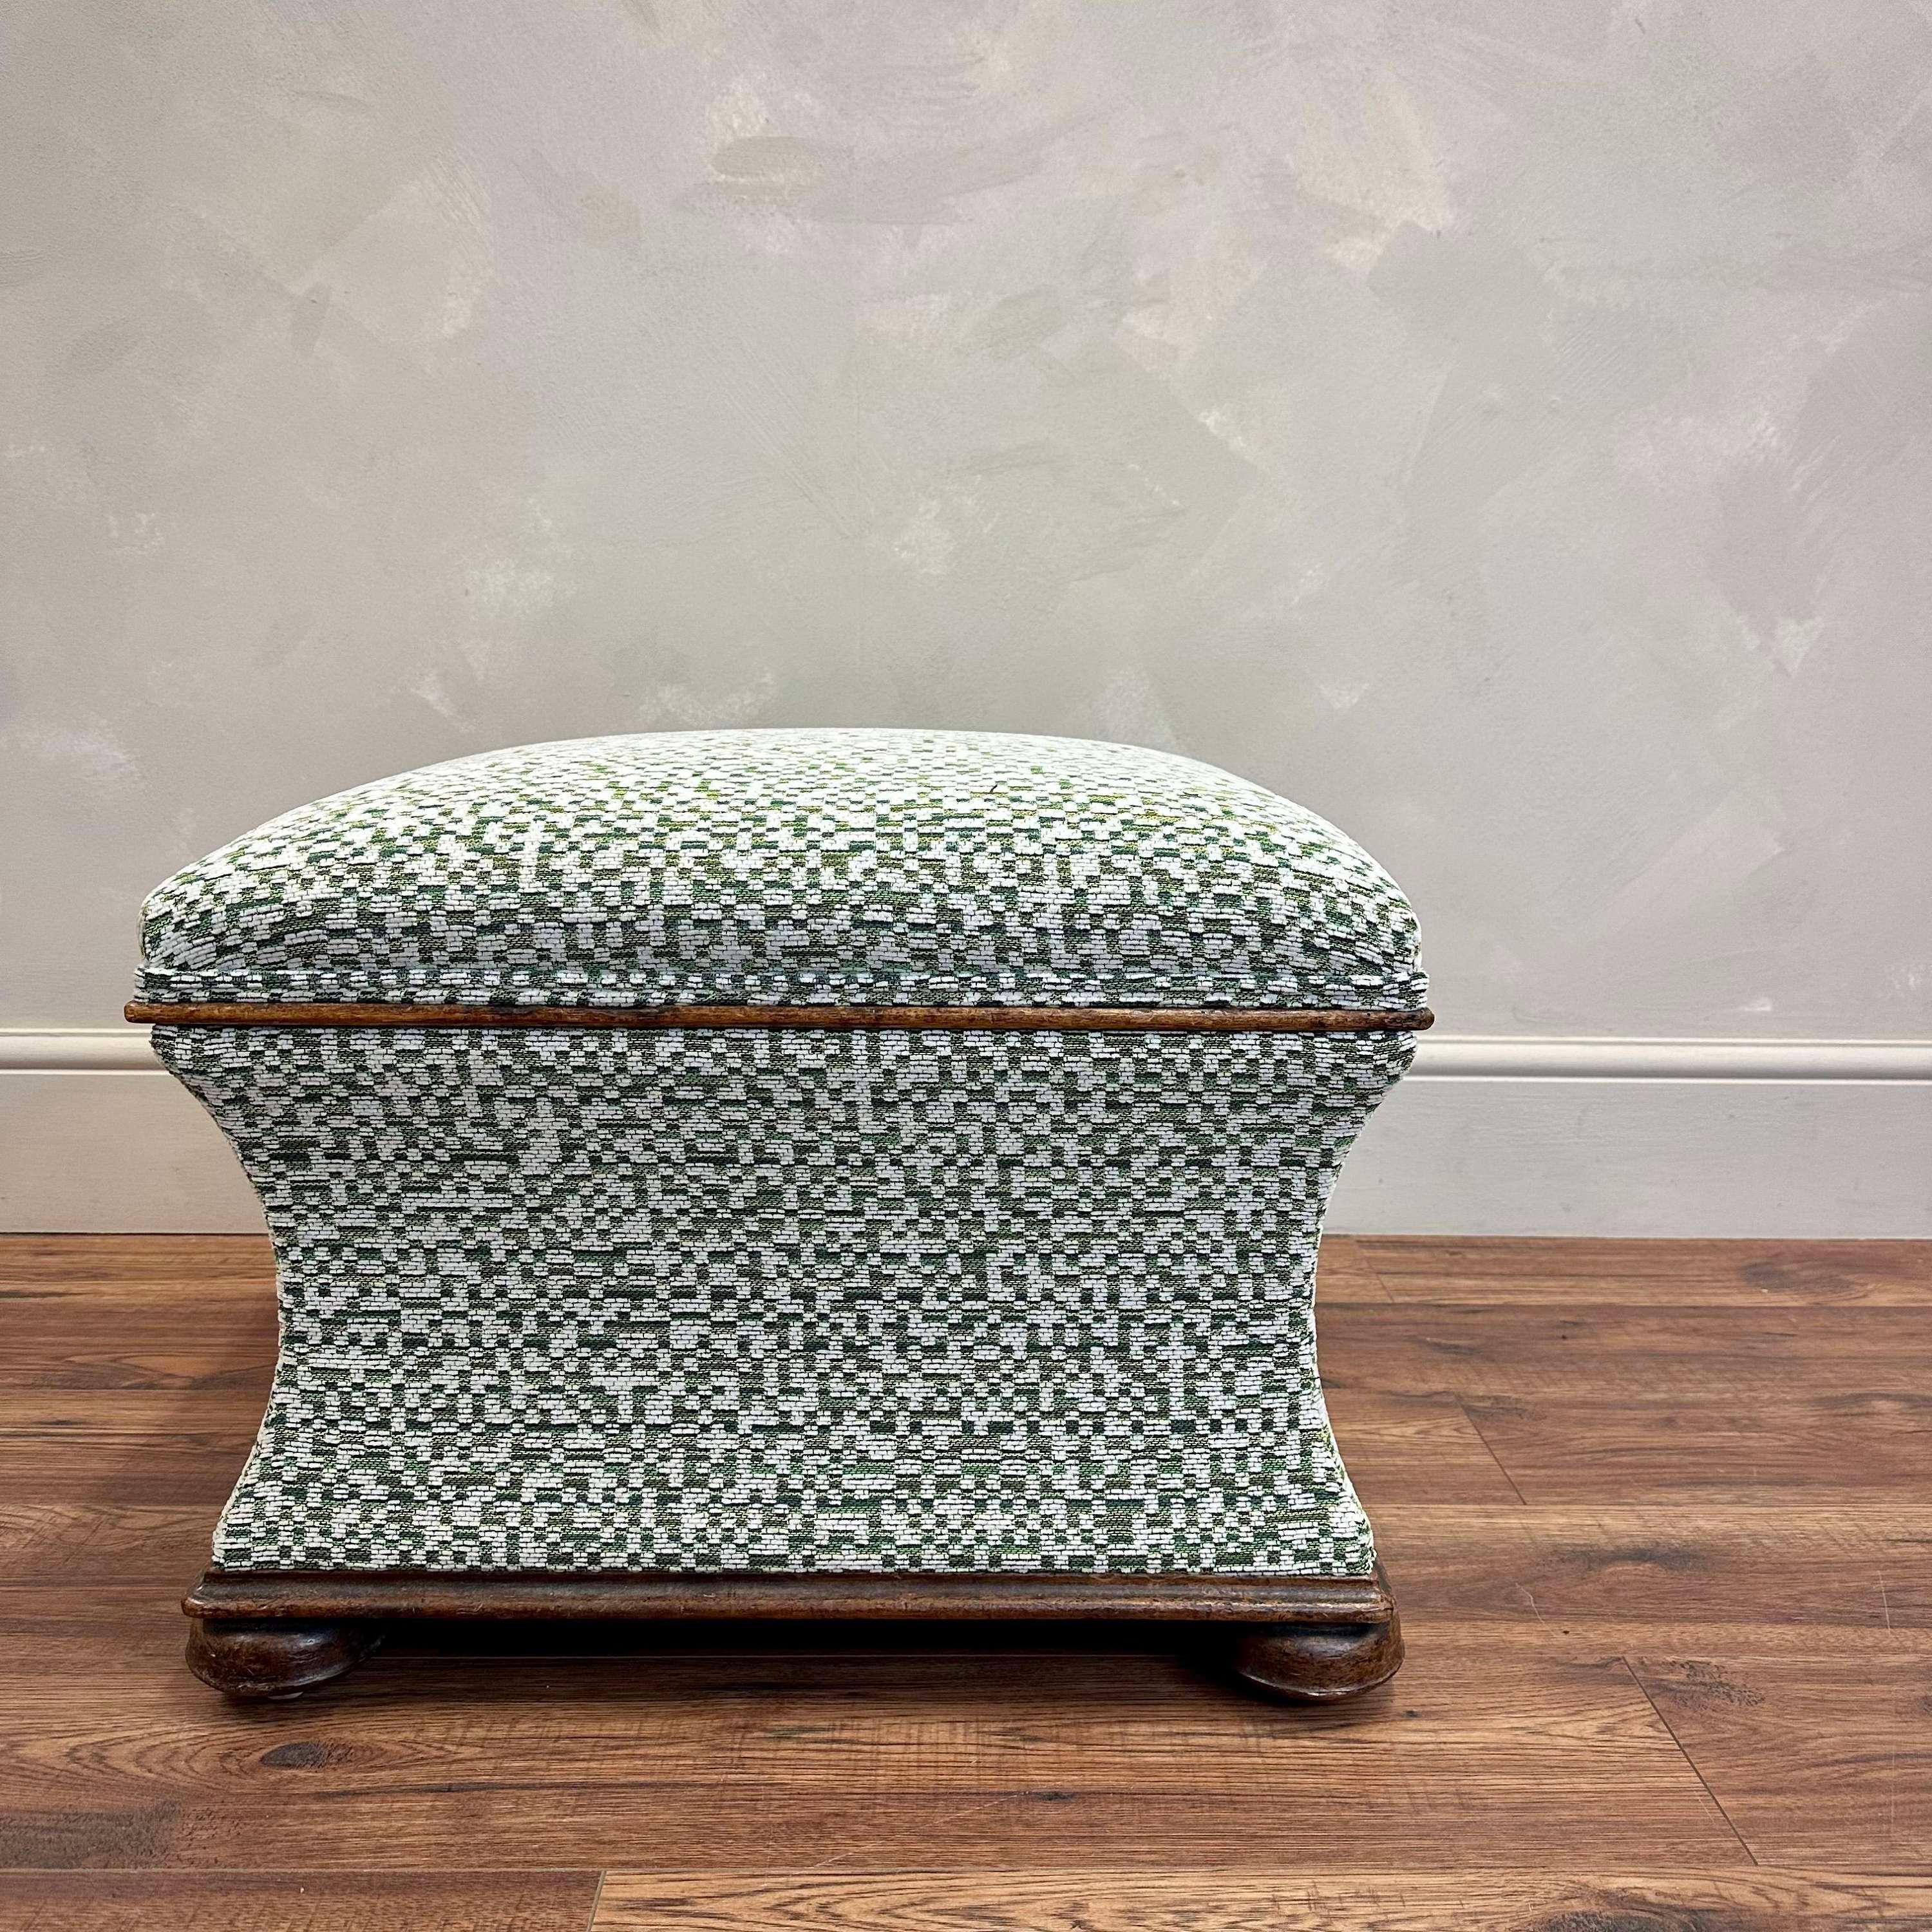 English, 19th Century upholstered cinched waist footstool.
Walnut base and lid with turned bun feet and castors.
Lovely quality, hardwearing green patterened fabric with calico lining.
Height - 42 cm 
Width - 48 cm
Depth - 42.5 cm
Please message if